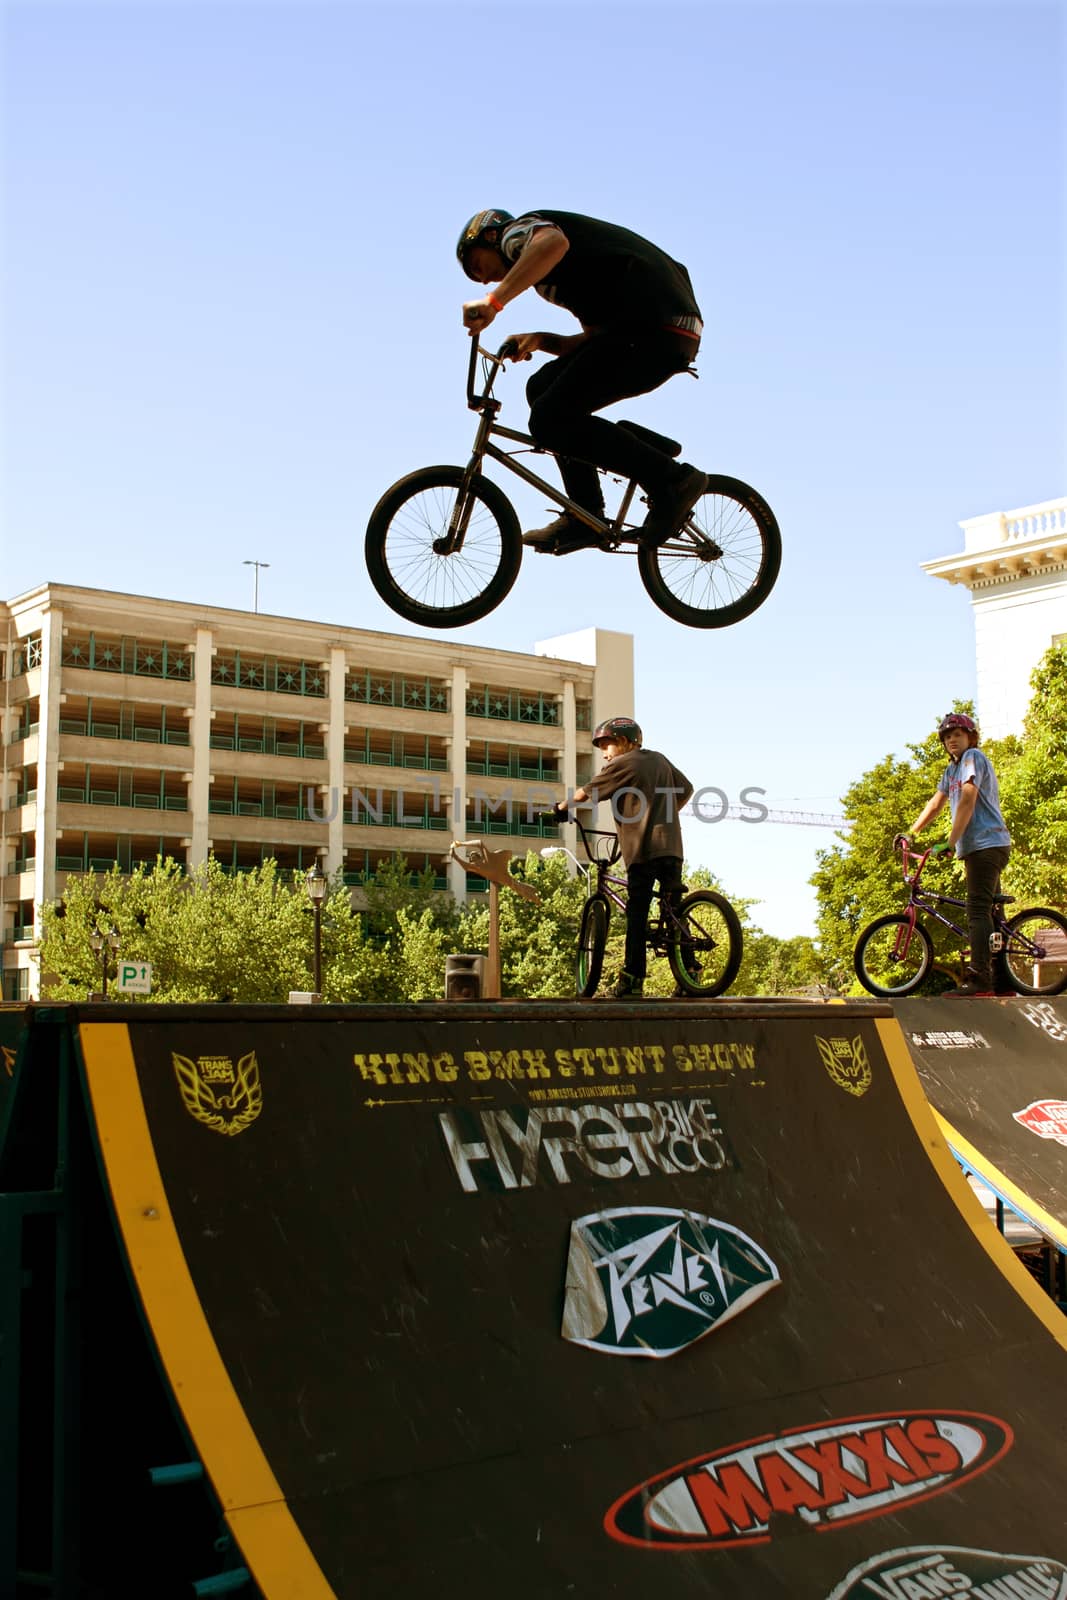 Athens, GA, USA - April 26, 2014:  A young man practices his park jumping tricks before the start of the BMX Trans Jam competition on the streets of downtown Athens.